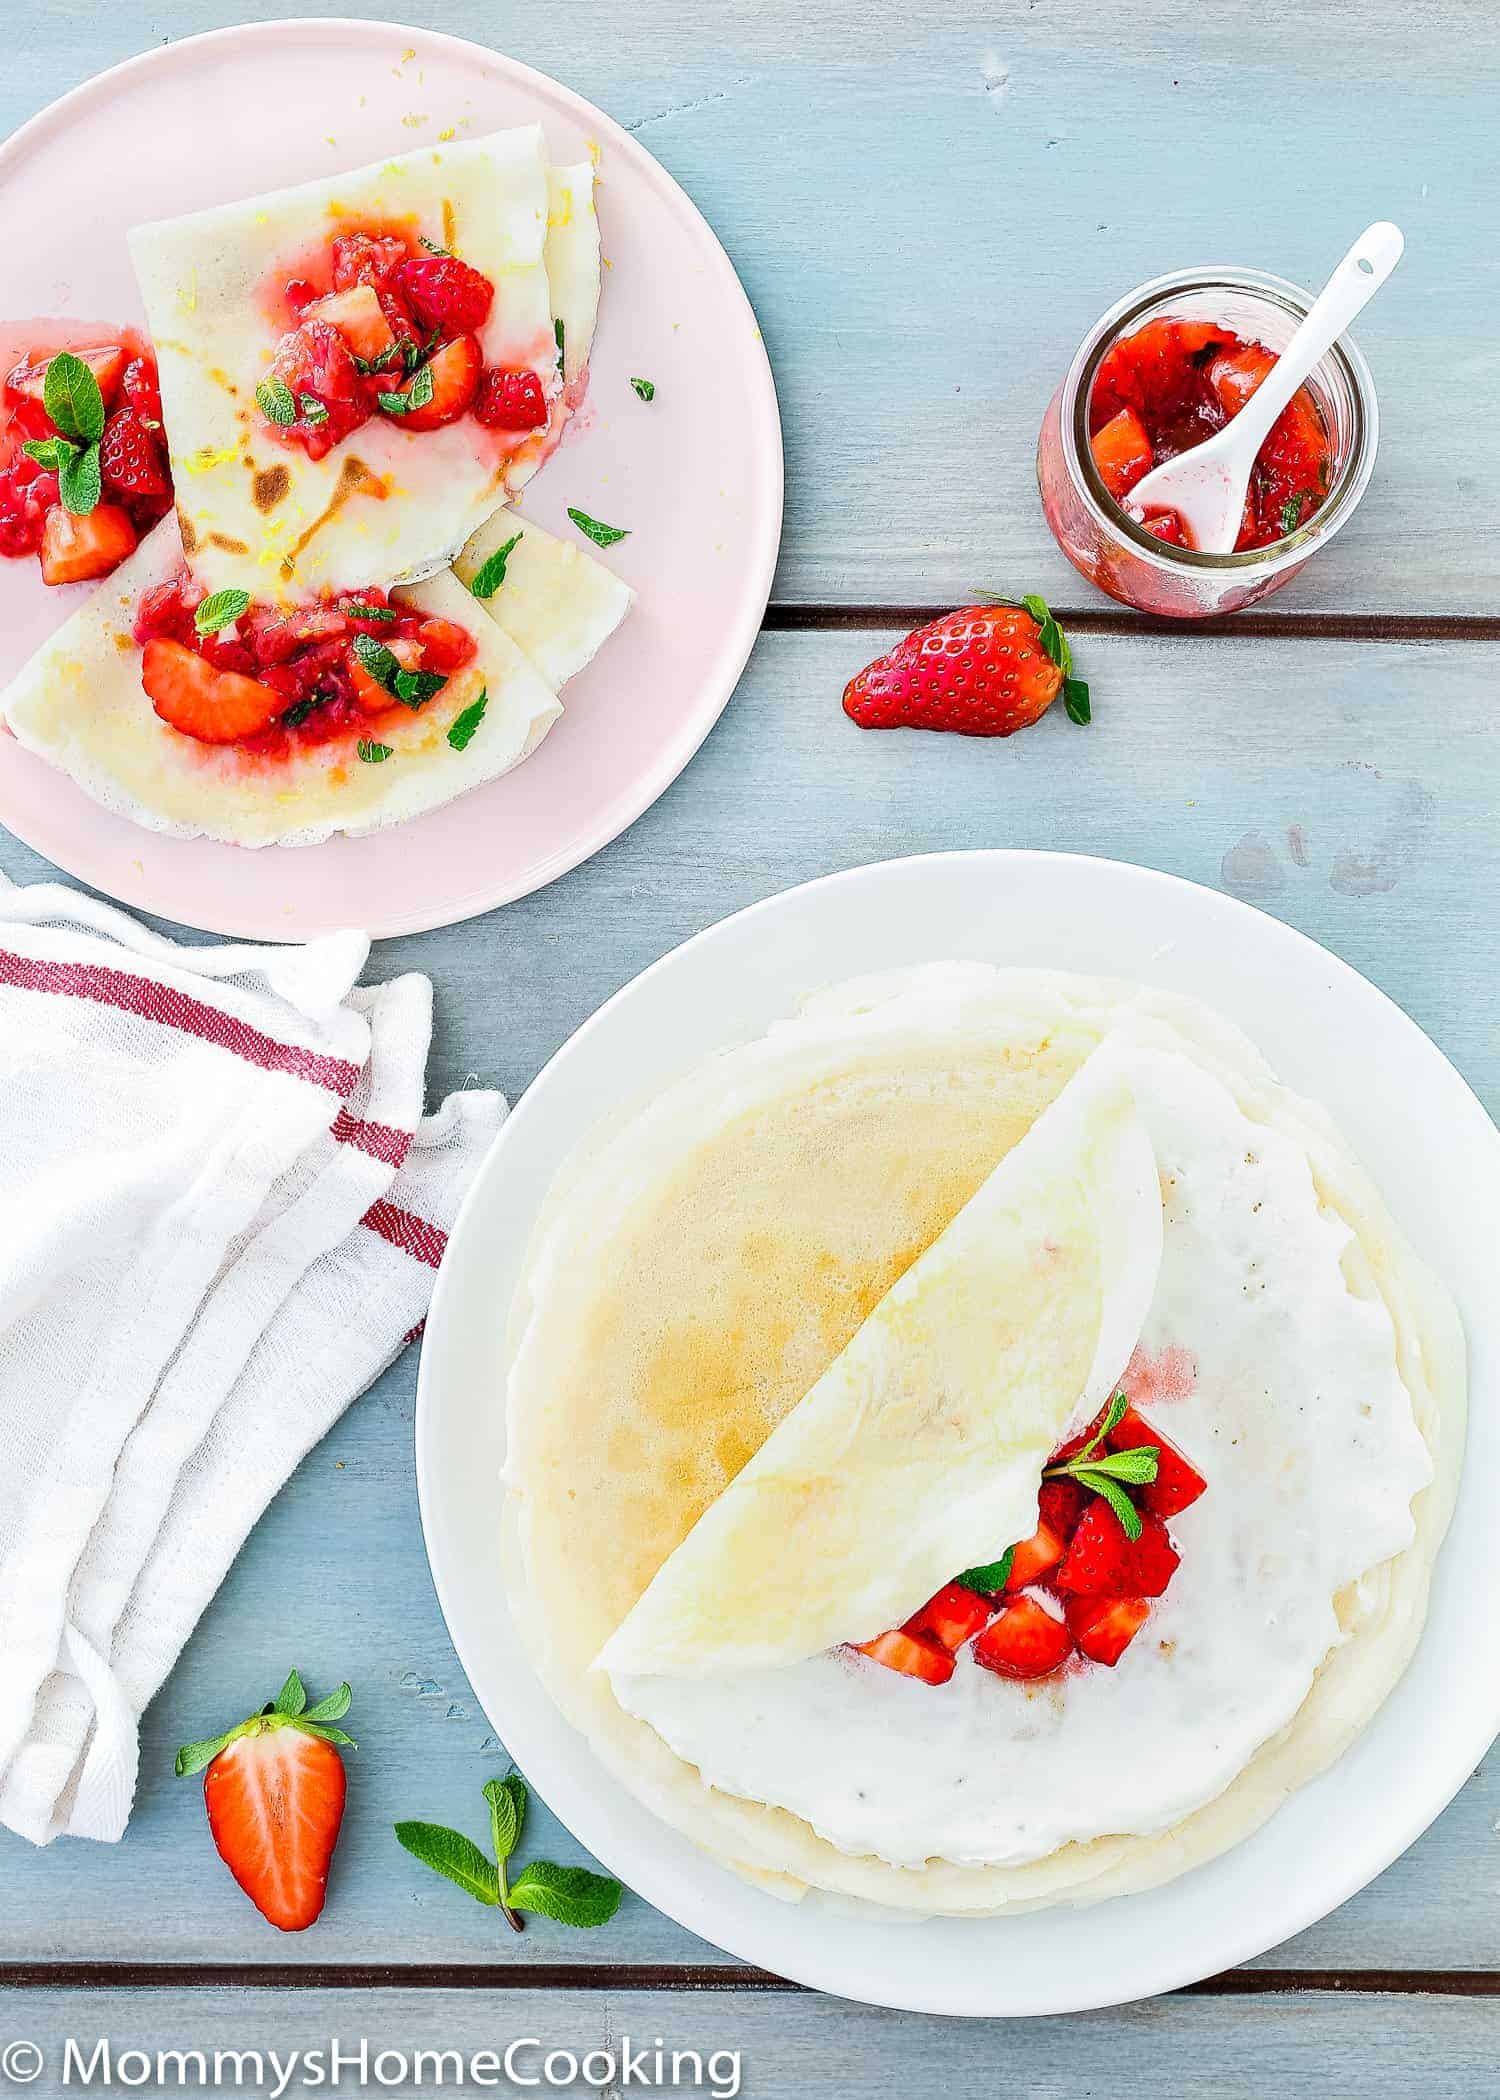 Overhead view of two plates with eggless crepes on them. Strawberries on top as garnish.